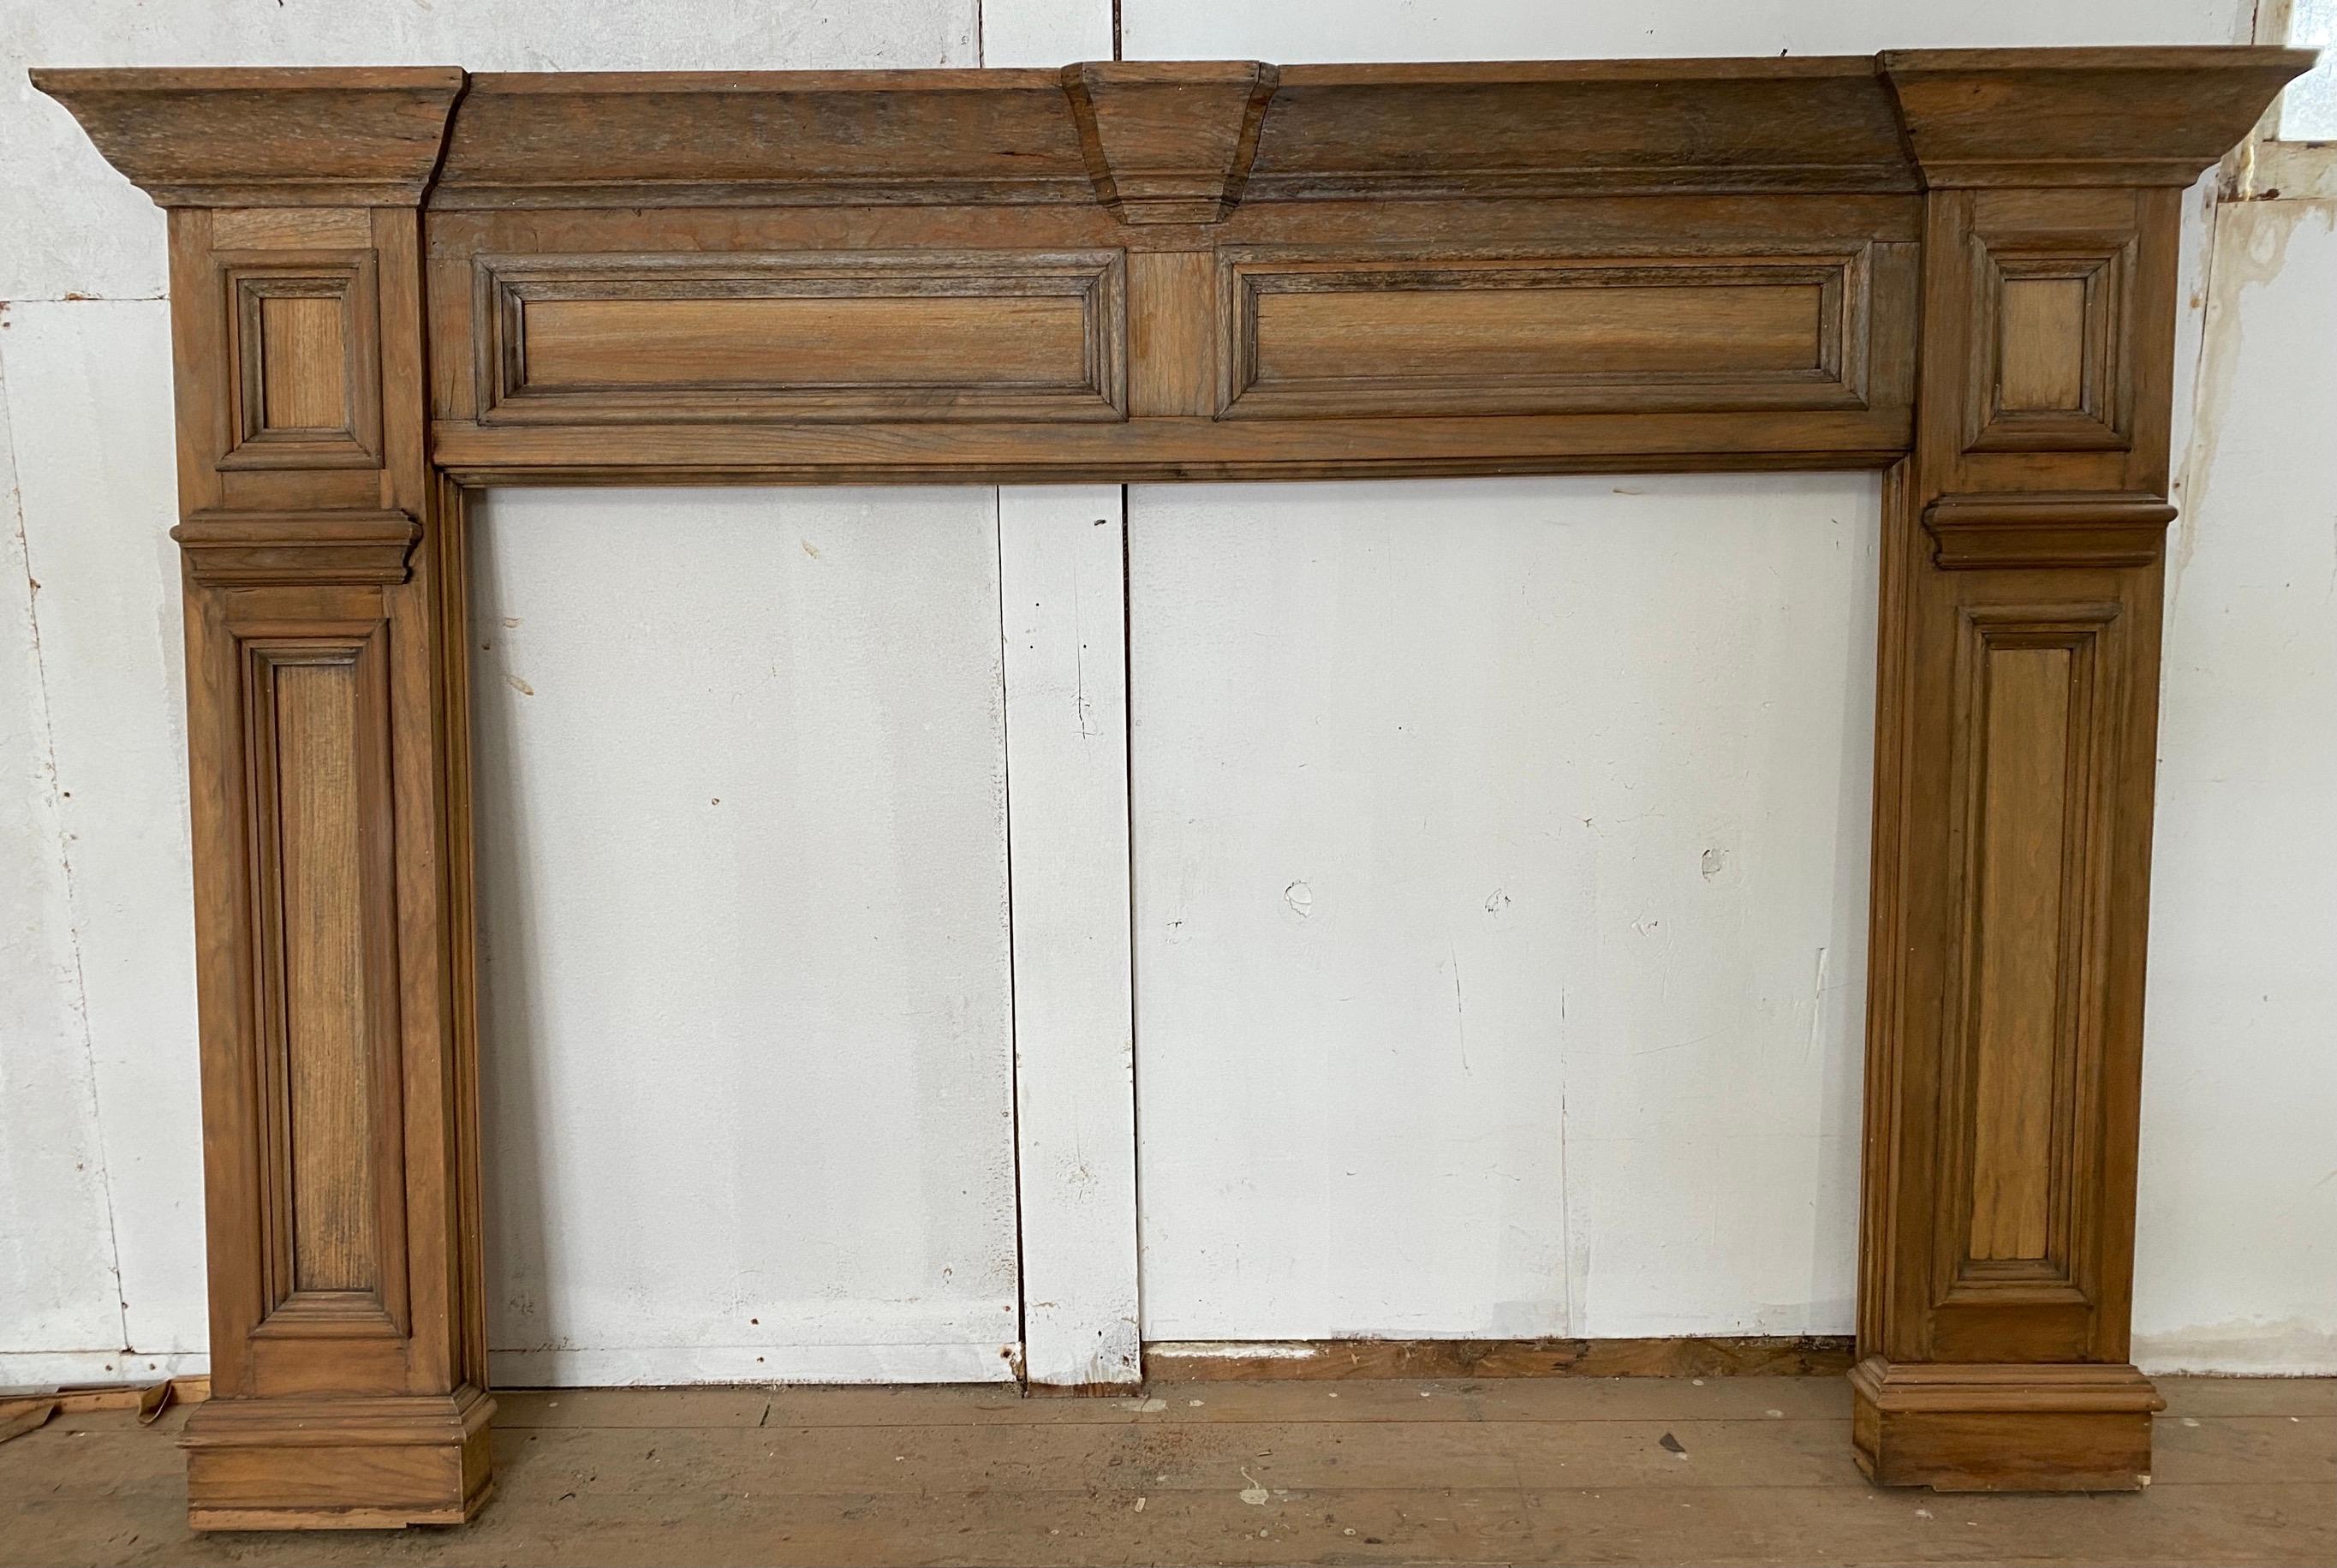 A handsome example of an unusually large American Federal Period wooden fireplace mantel. The wood does show aged wear. Use it as is for added character or refinish for a more finished look.
Inside opening: 59